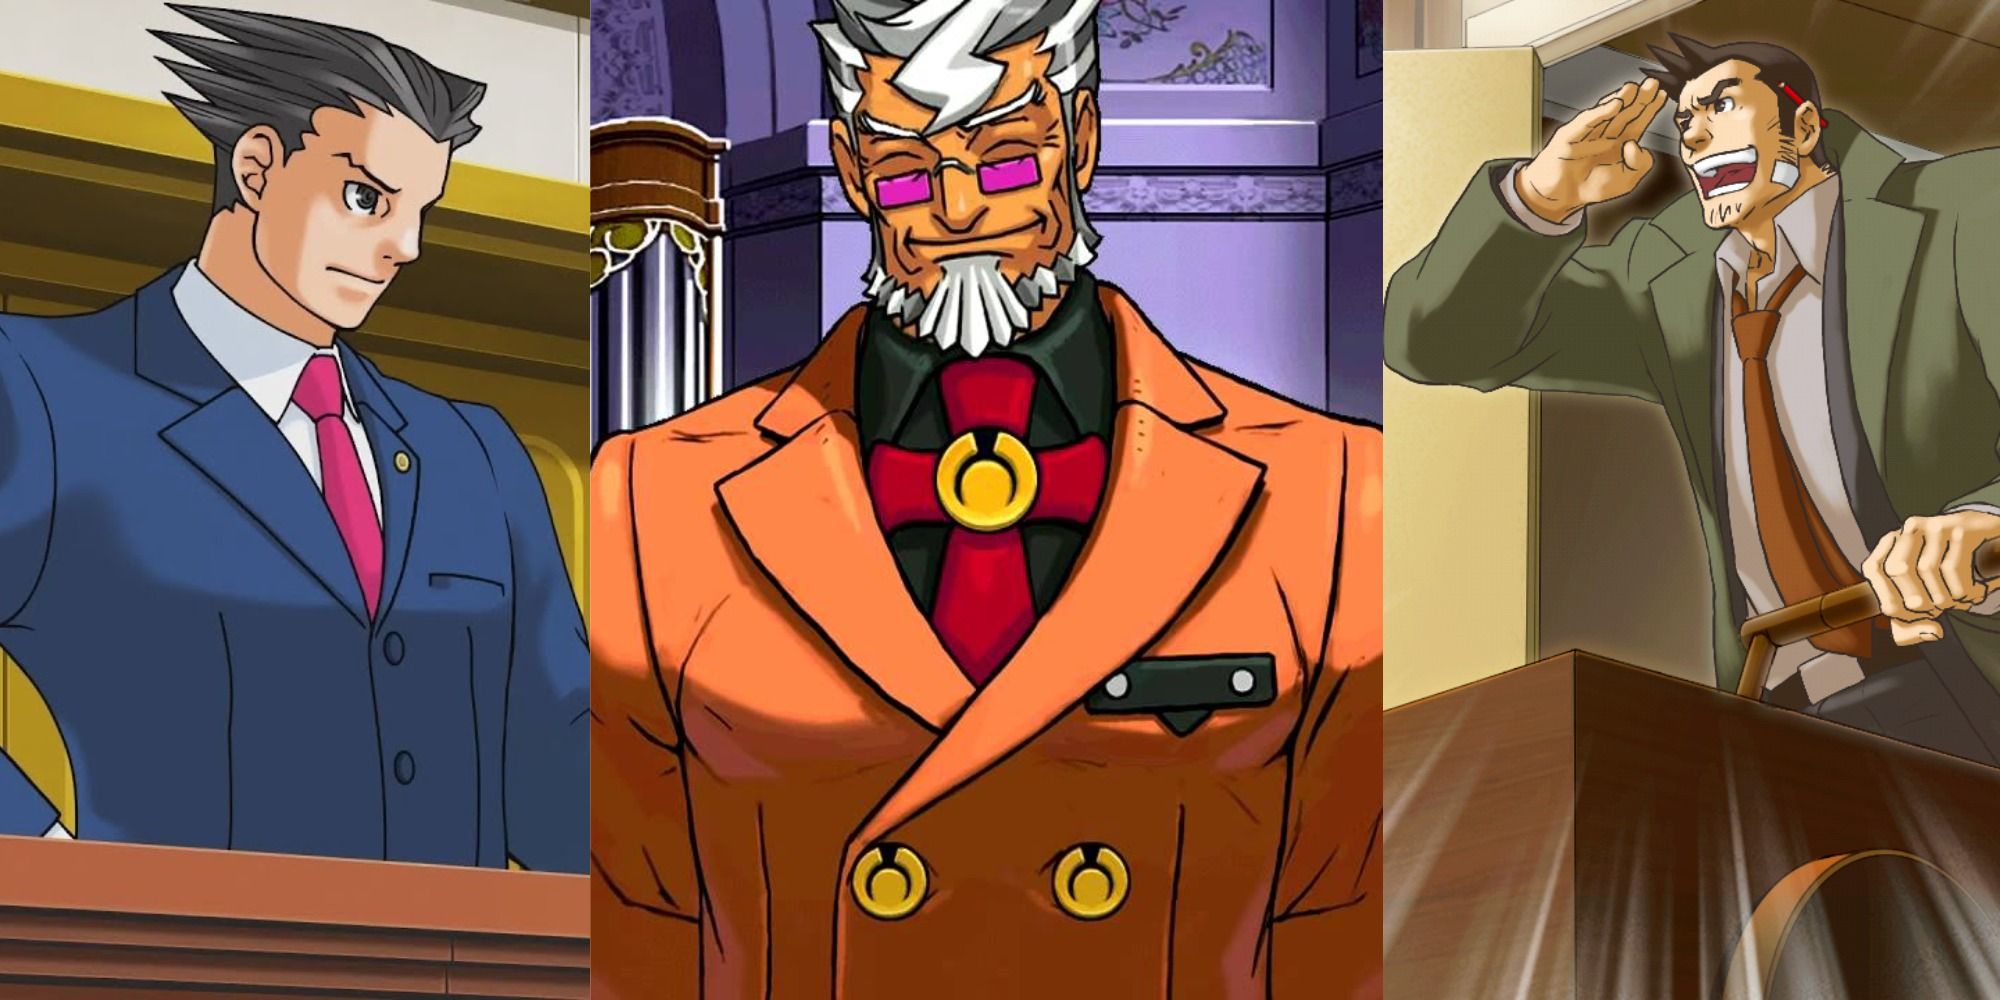 Three images side by side of Phoenix Wright, Damon Gant, and Dick Gumshoe in Ace Attorney